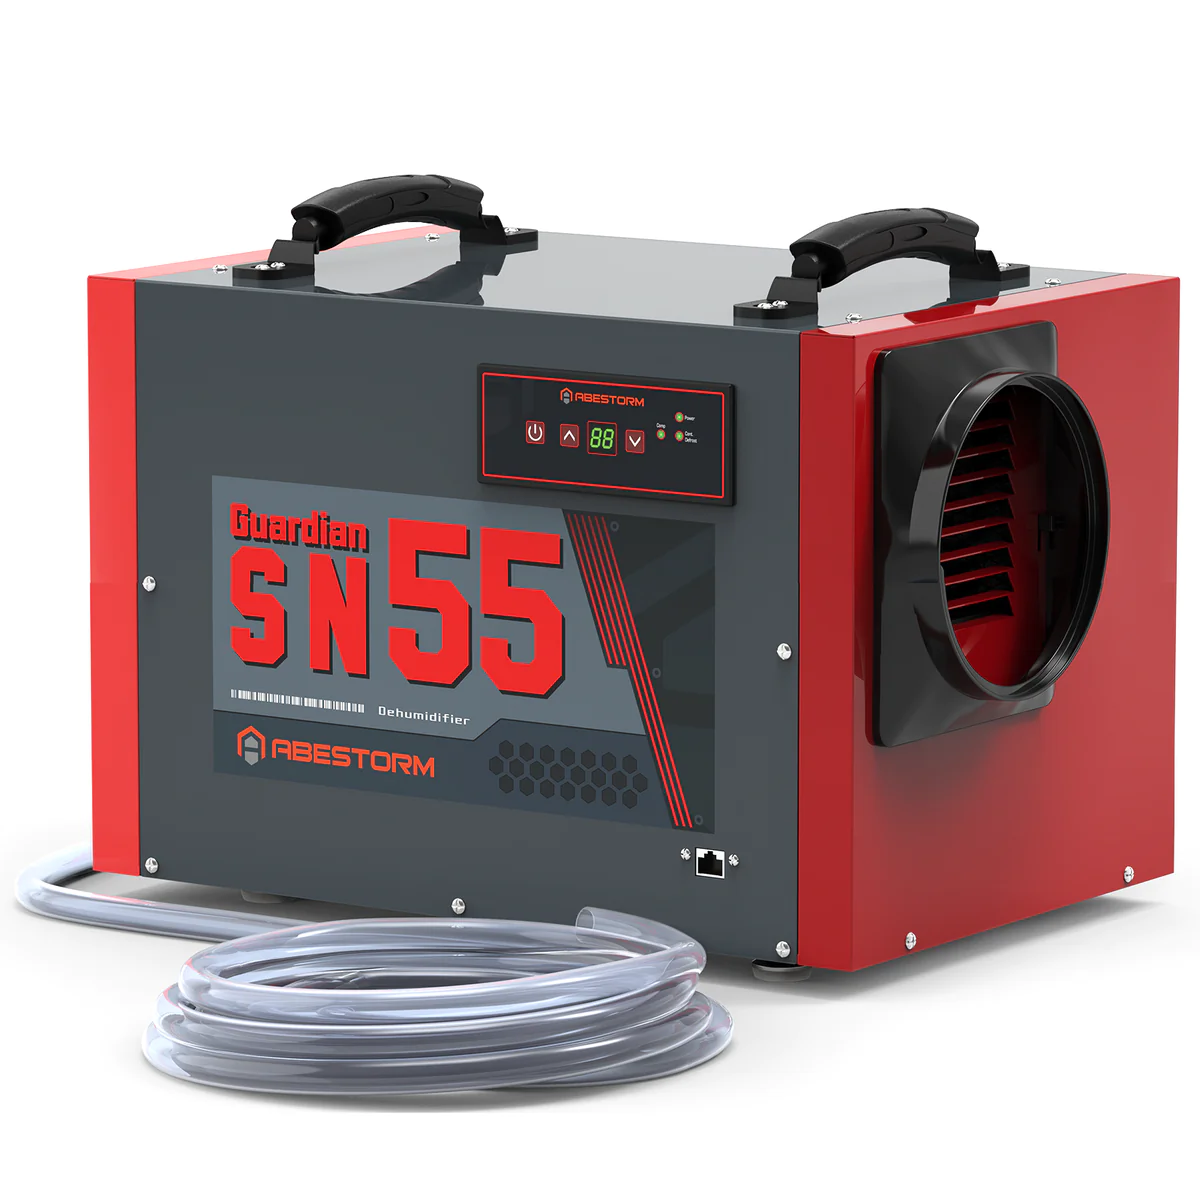 SN55 for warmer temperature with condensation coils to get rid of standing water